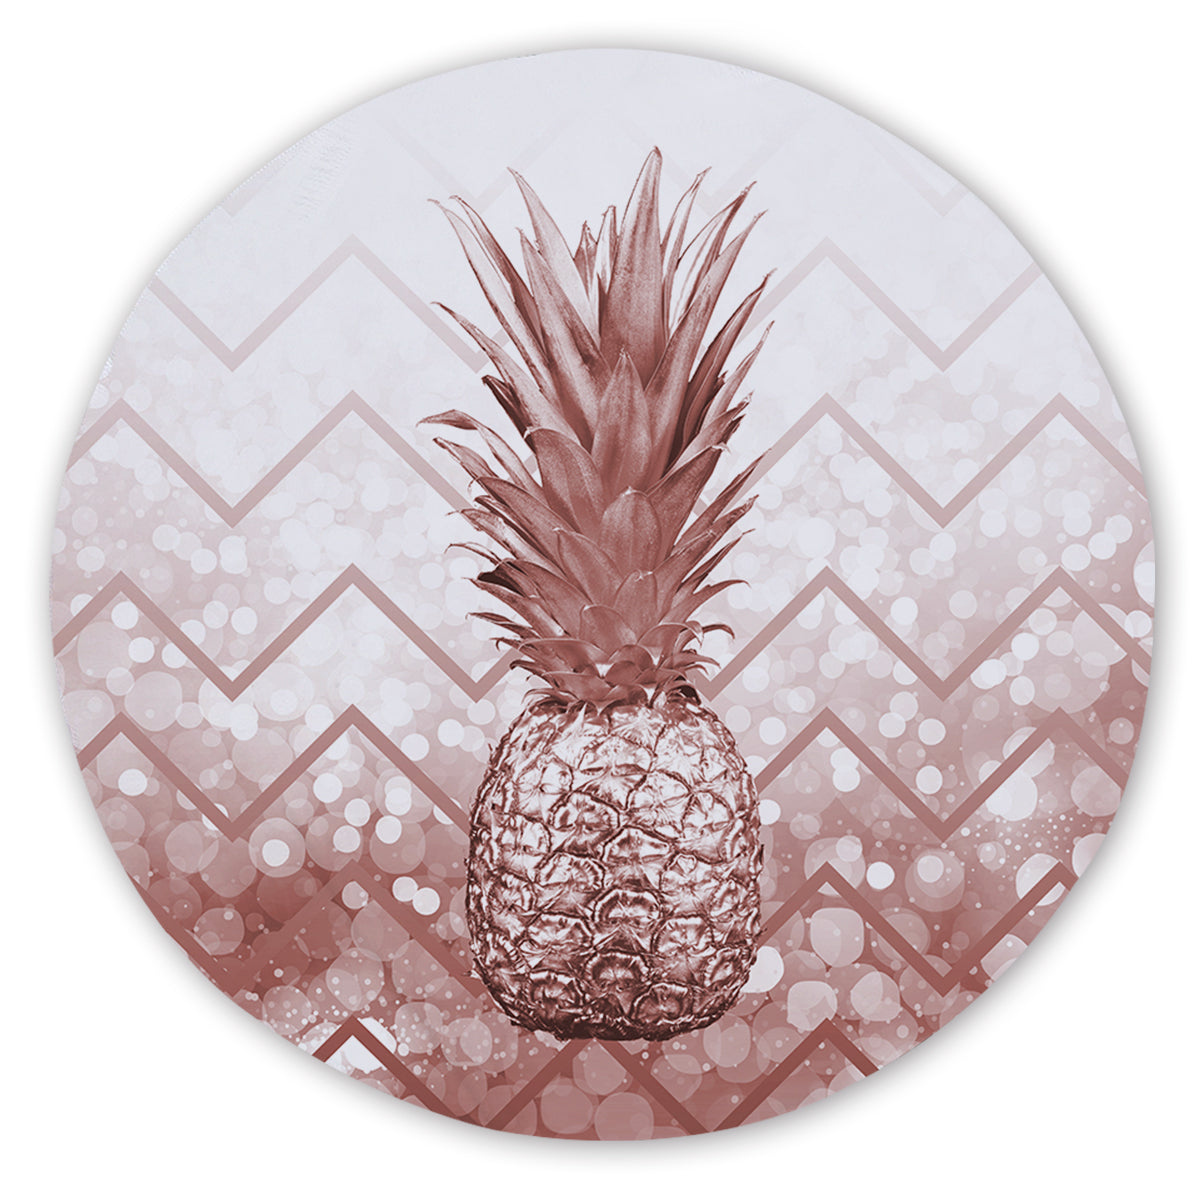 The Golden Pineapple Round Sand-Free Towel